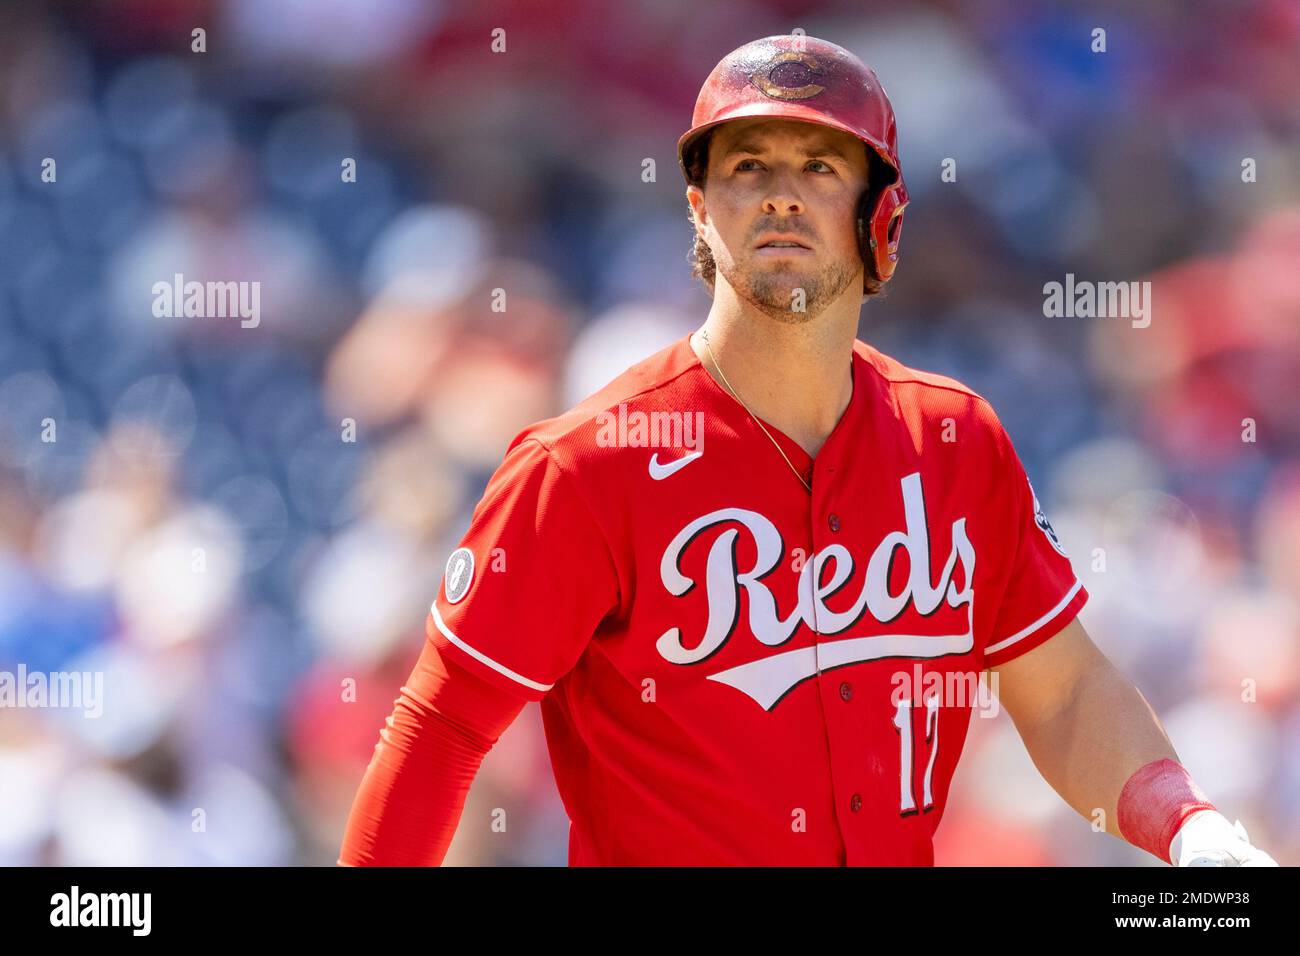 Los Angeles, United States. 17th Apr, 2022. Cincinnati Reds Tyler Naquin  (12) during a MLB baseball game against the Los Angeles Dodgers, Sunday,  Apr. 17, 2022, in Los Angeles. The Dodgers defeated